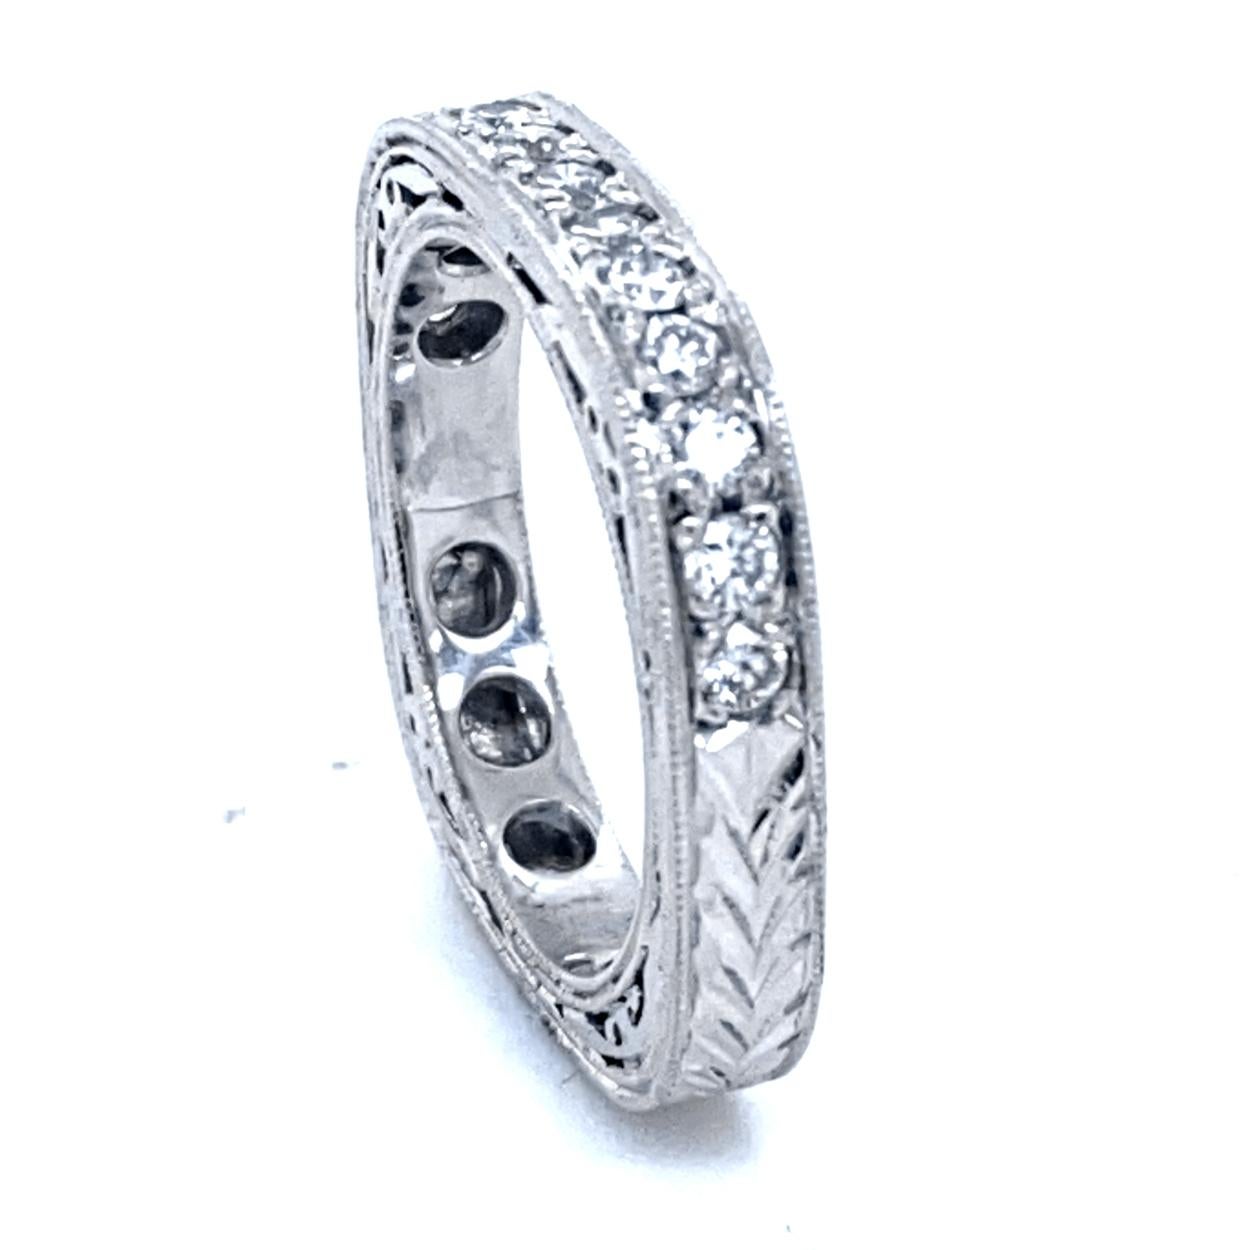 This Antique design Wedding Ring is made in Platinum with 13 pieces of 2.1 mm Round diamonds pave set in the middle with total weight of of 0.50 Ct.  The ring is square shaped with Hand Engraving on the shank and accented with milgained edges &